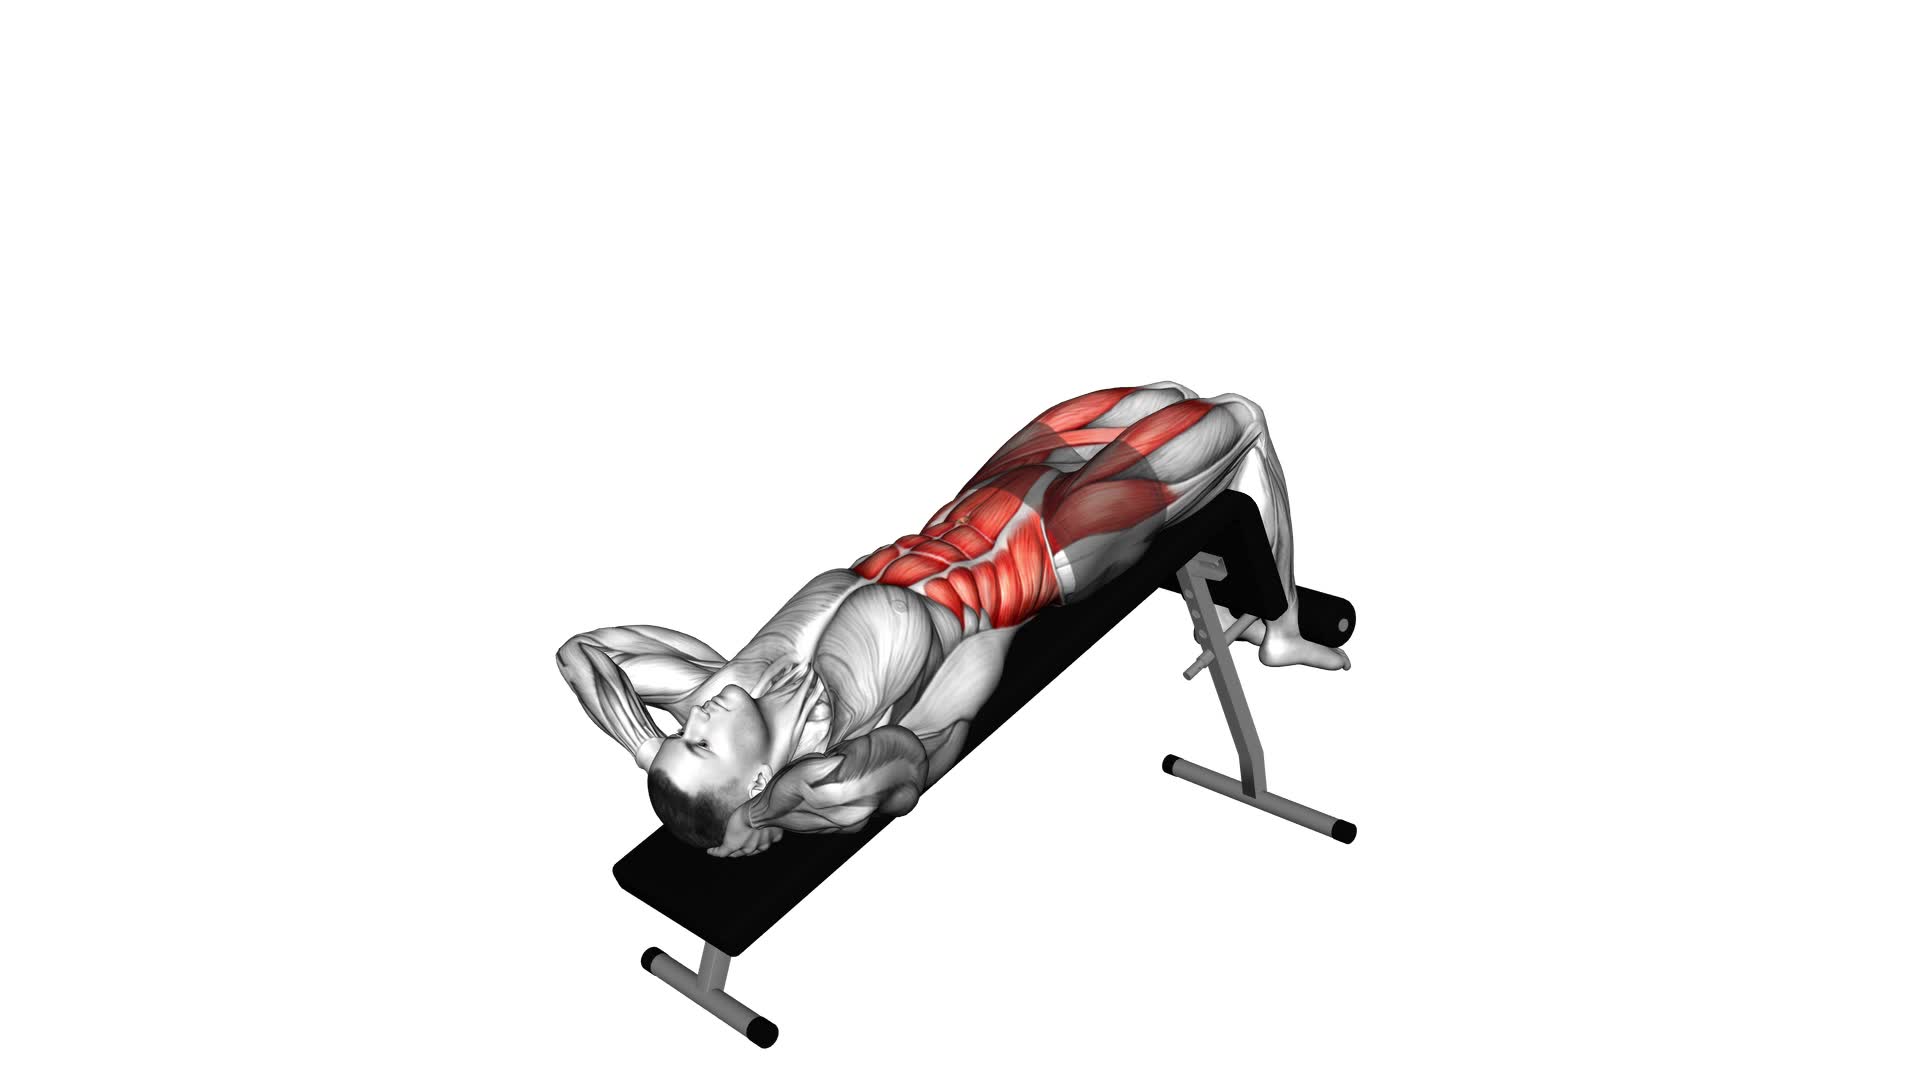 Incline Twisting Sit-up - Video Exercise Guide & Tips